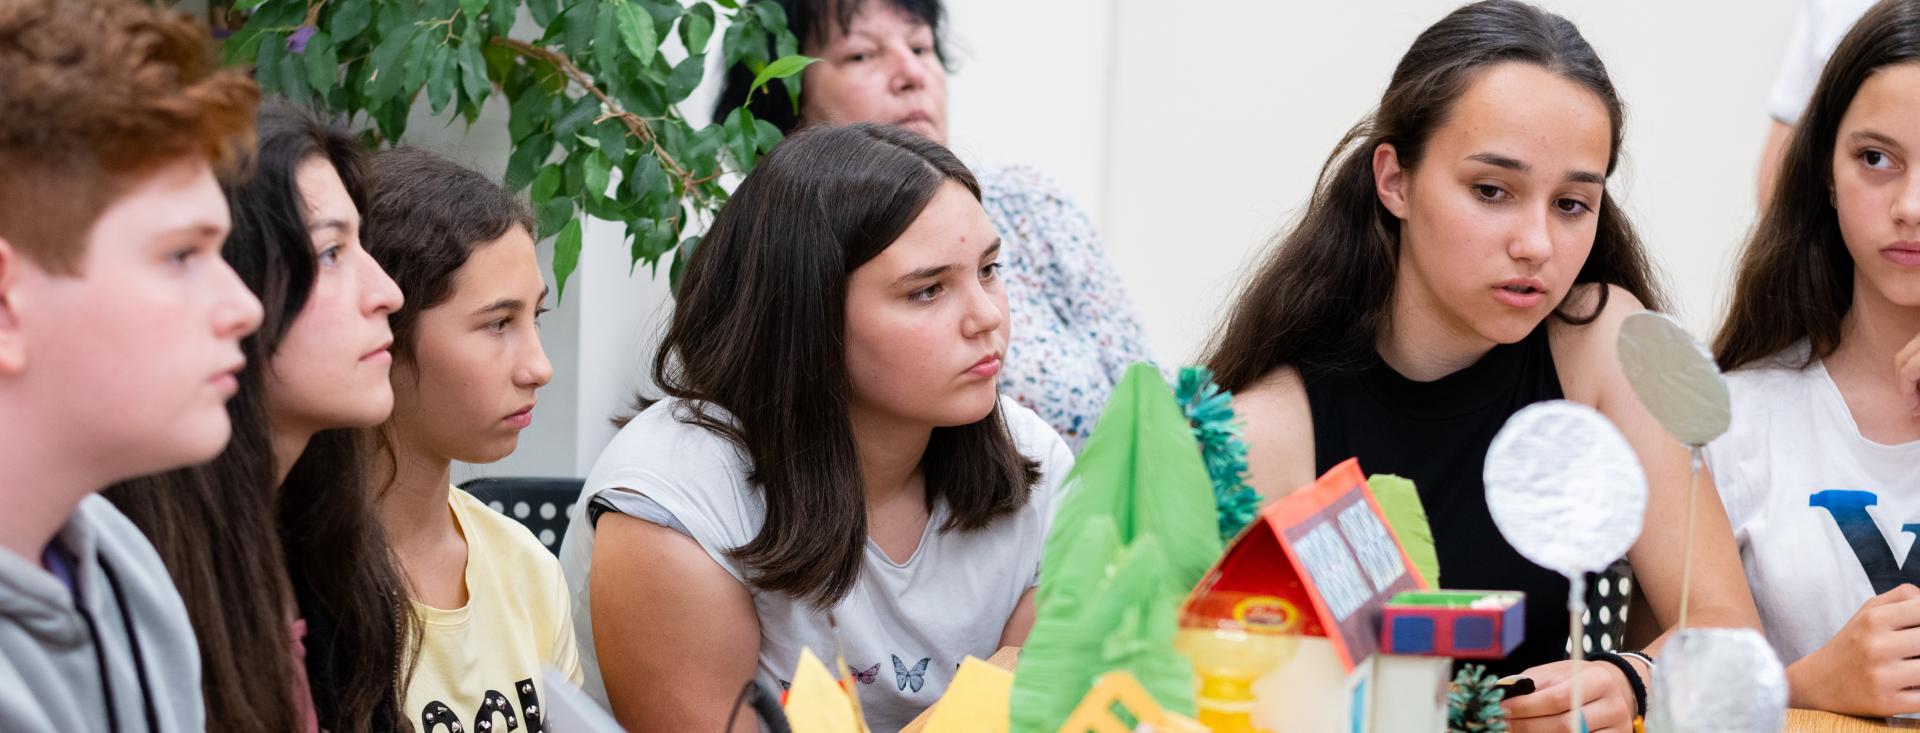 In Bulgaria, a group of secondary students is sitting around a climate change project in the form of a diorama. One of the students has her mouth open as she presents the project to an audience. There is an open laptop next to the diorama. The students have serious expressions on their faces.